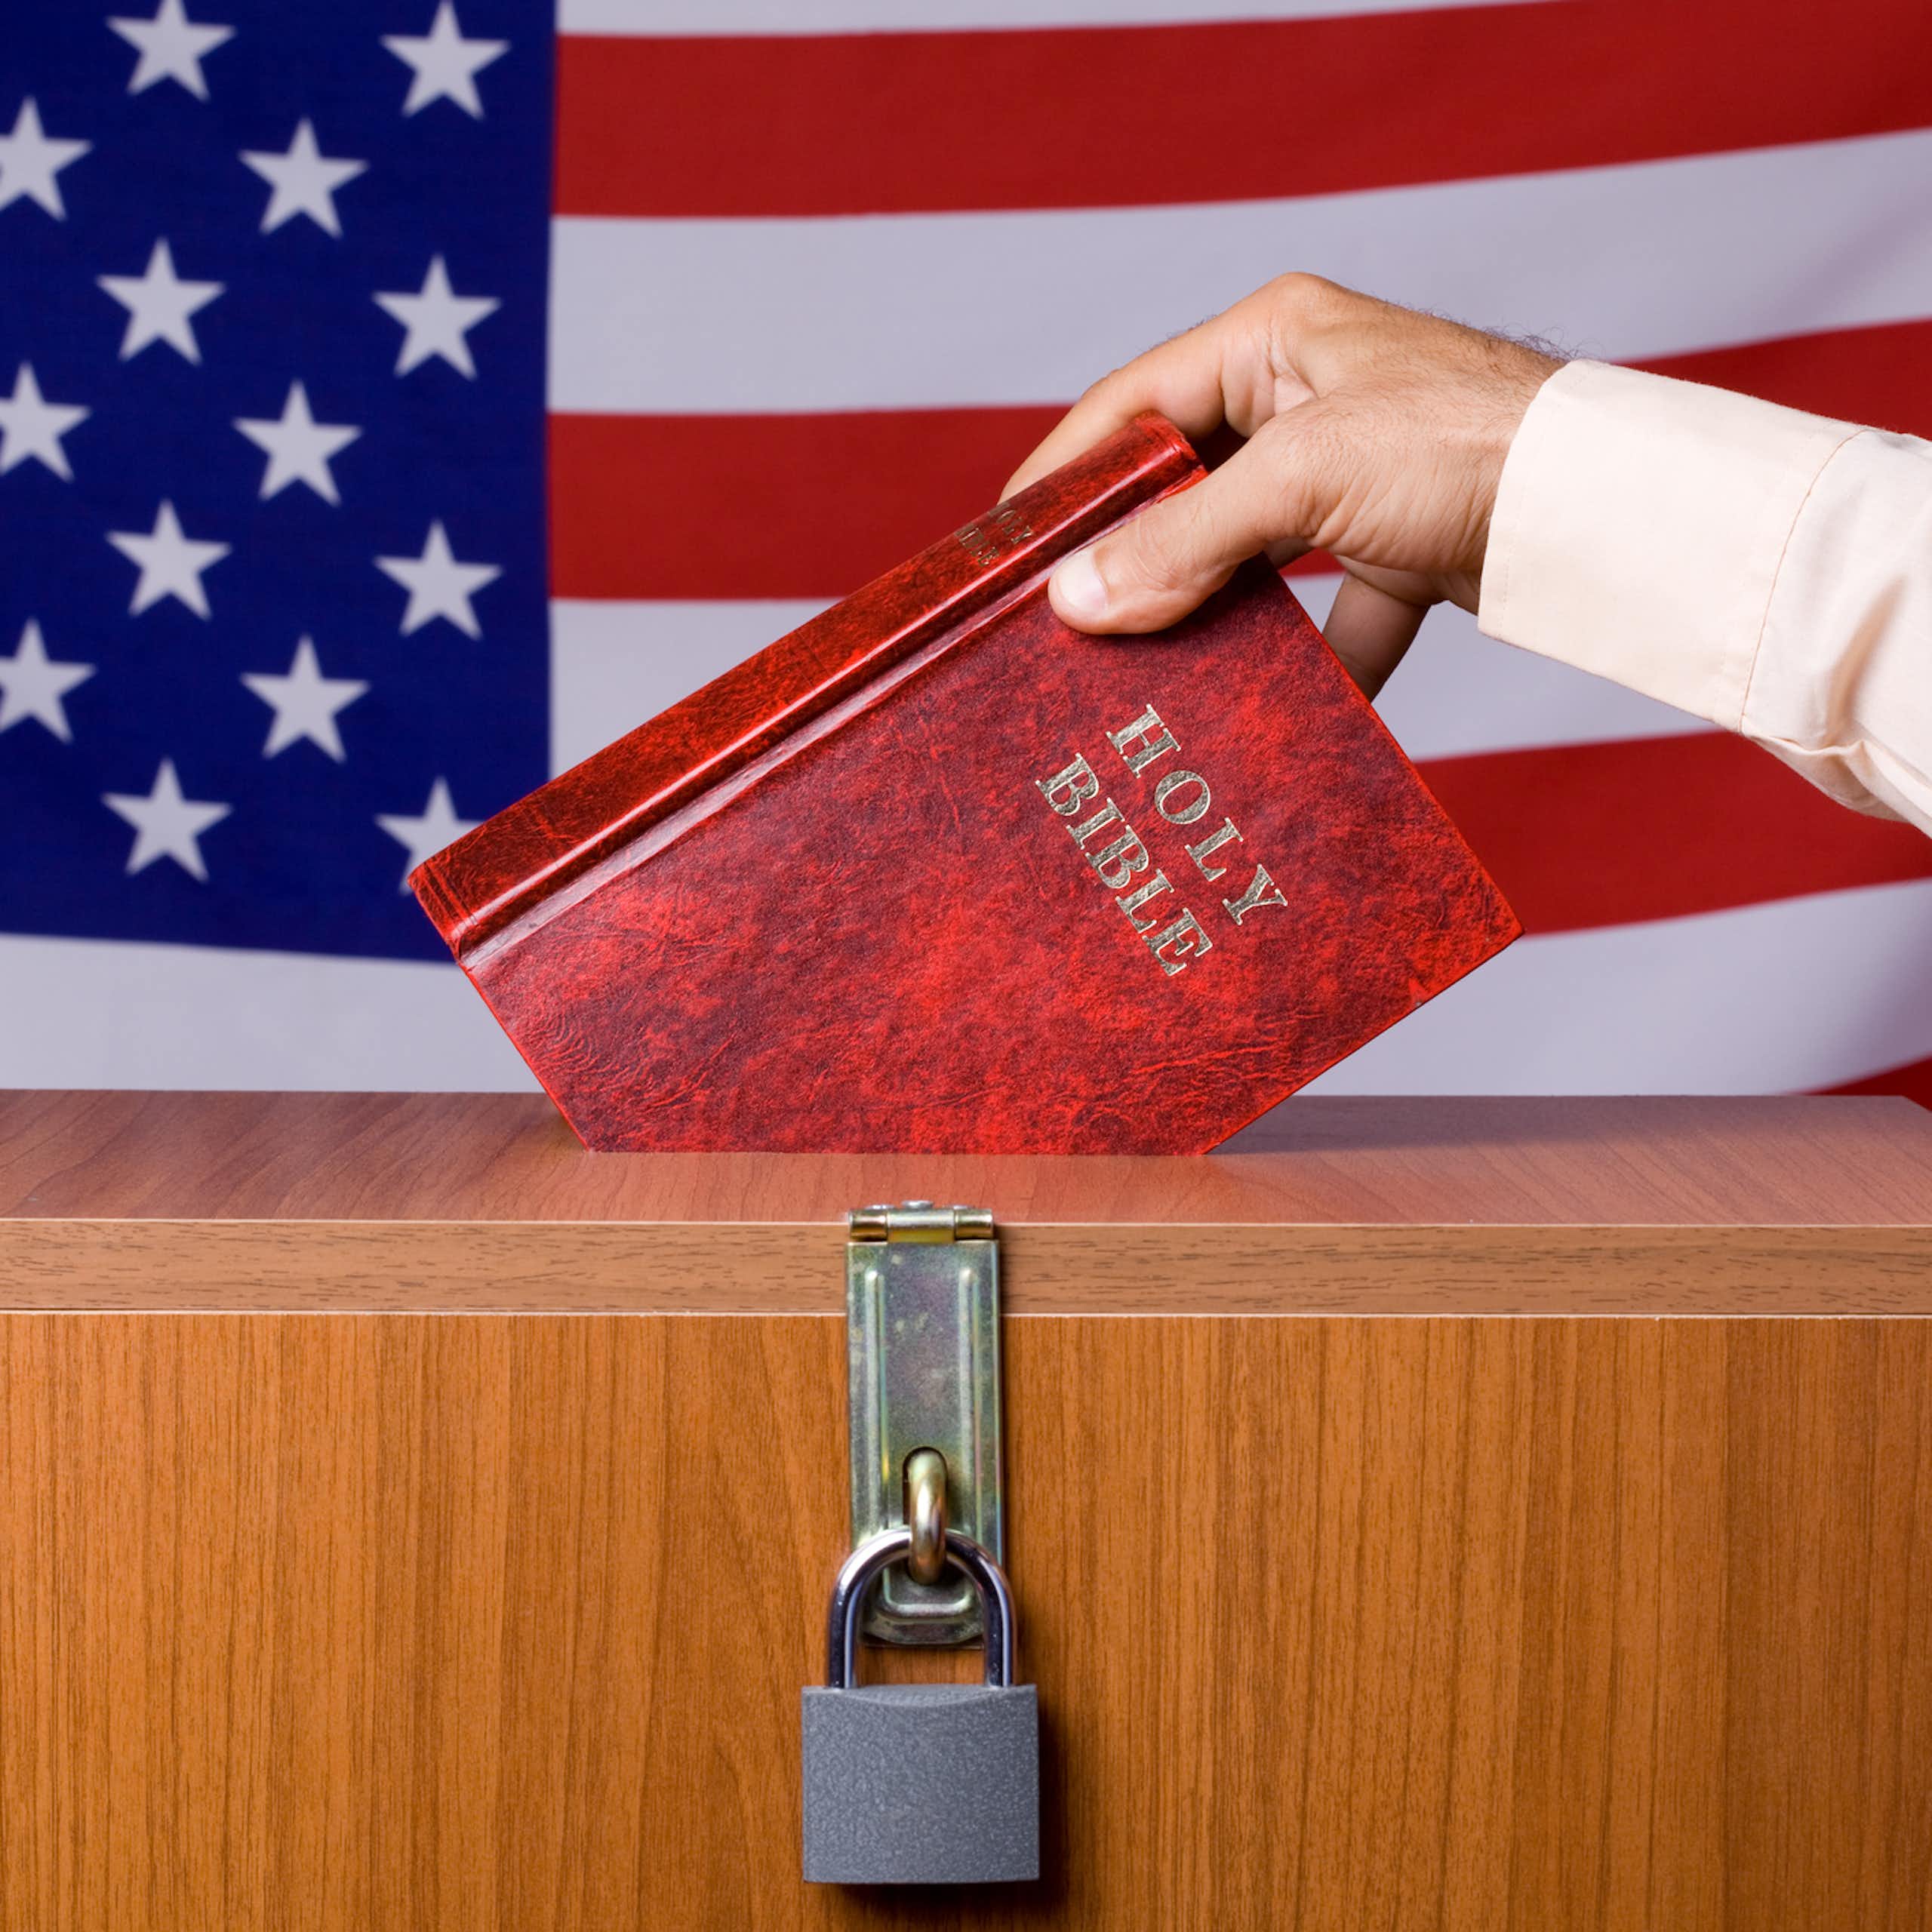 A hand puts a Bible into a locked box in front of a U.S. flag.